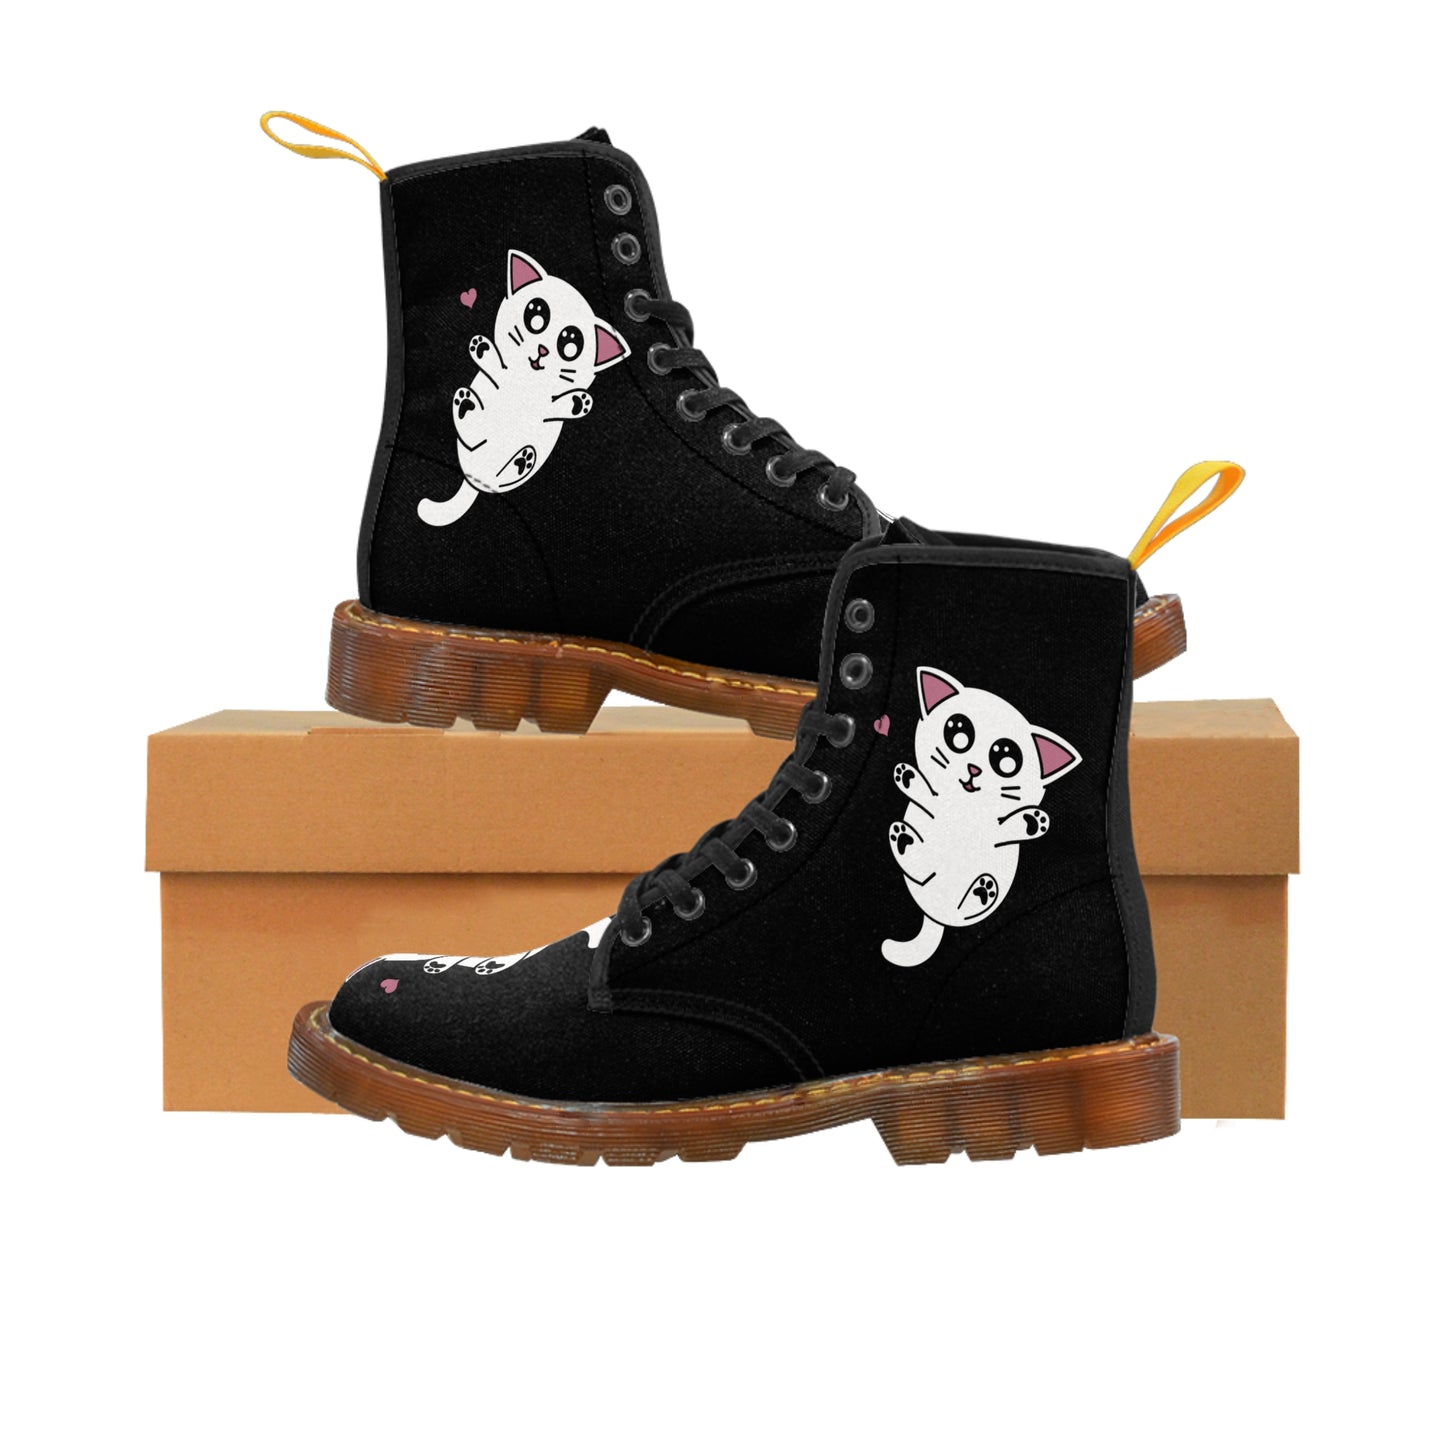 Women's Canvas Boots "Mew Baby"